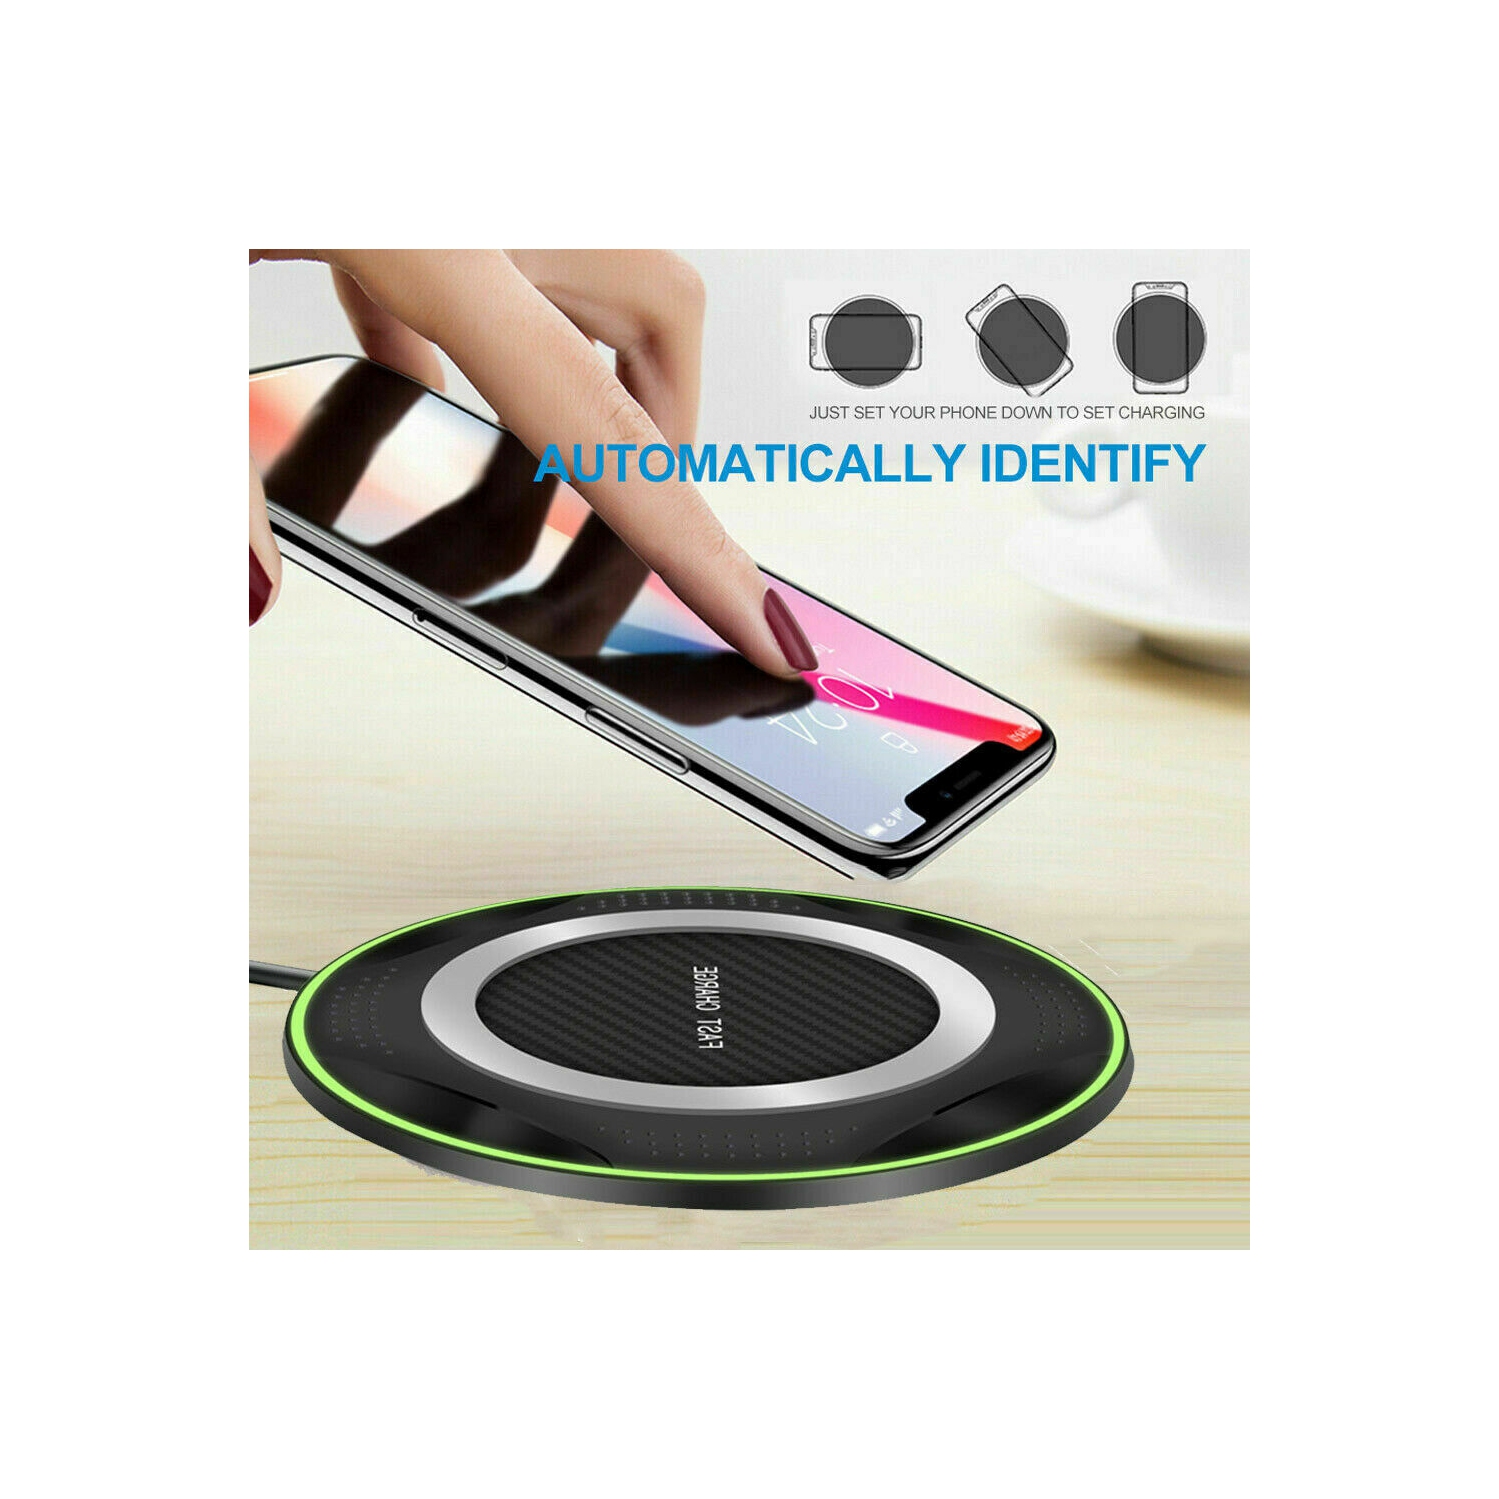 ISTAR Wireless Charger 10W Max Fast Wireless Charging Pad Compatible With IPhone 12/12 Mini/12 Pro Max/SE 2020/11 Pro Max,Samsung Galaxy S21/S20